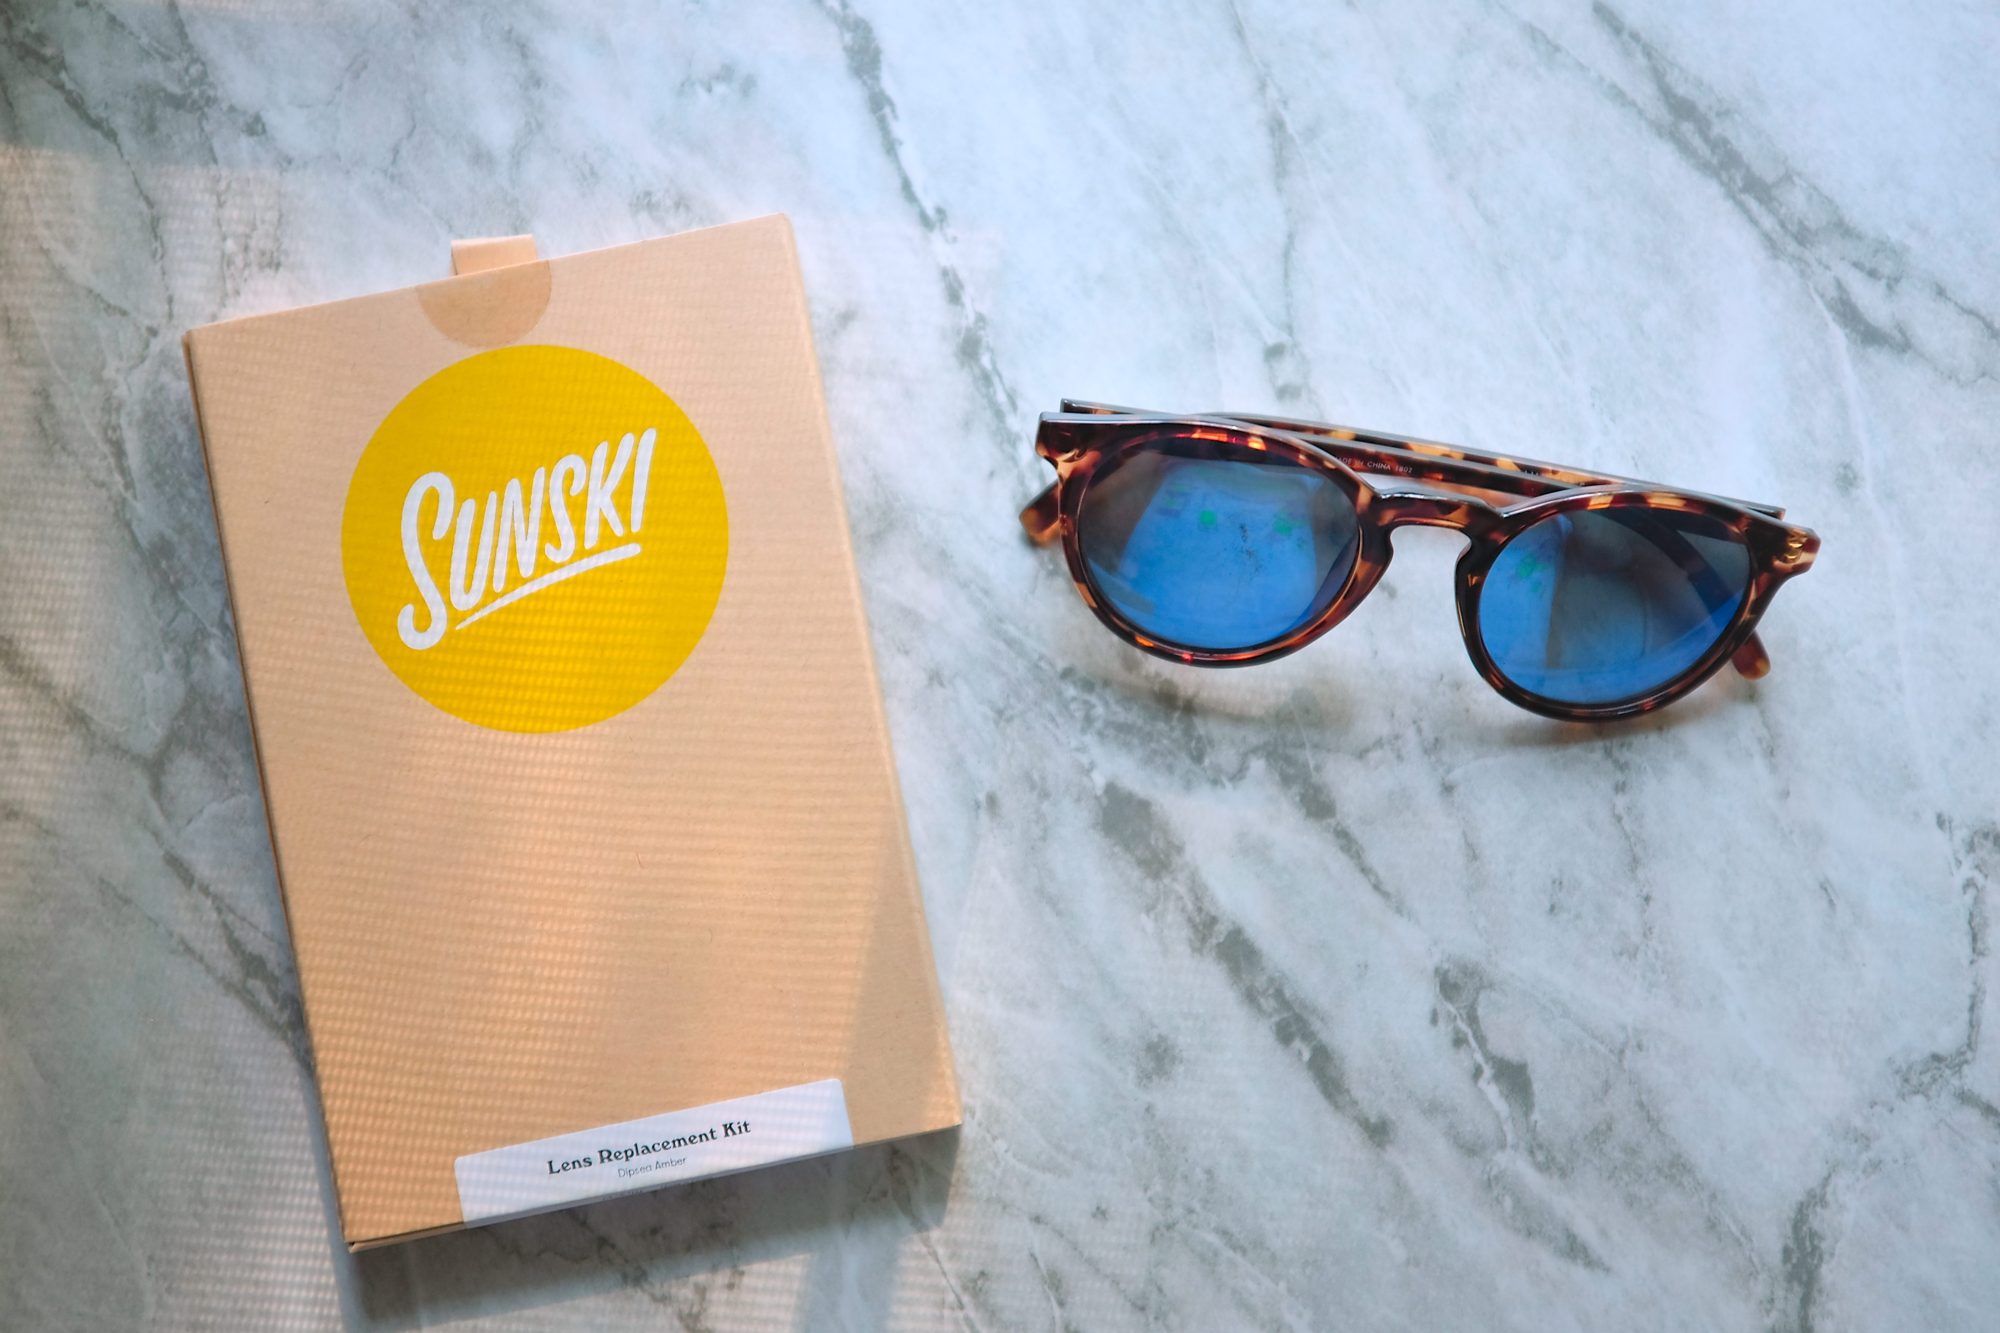 Sunski Sunglasses Review: Quality, Sustainable, & Affordable